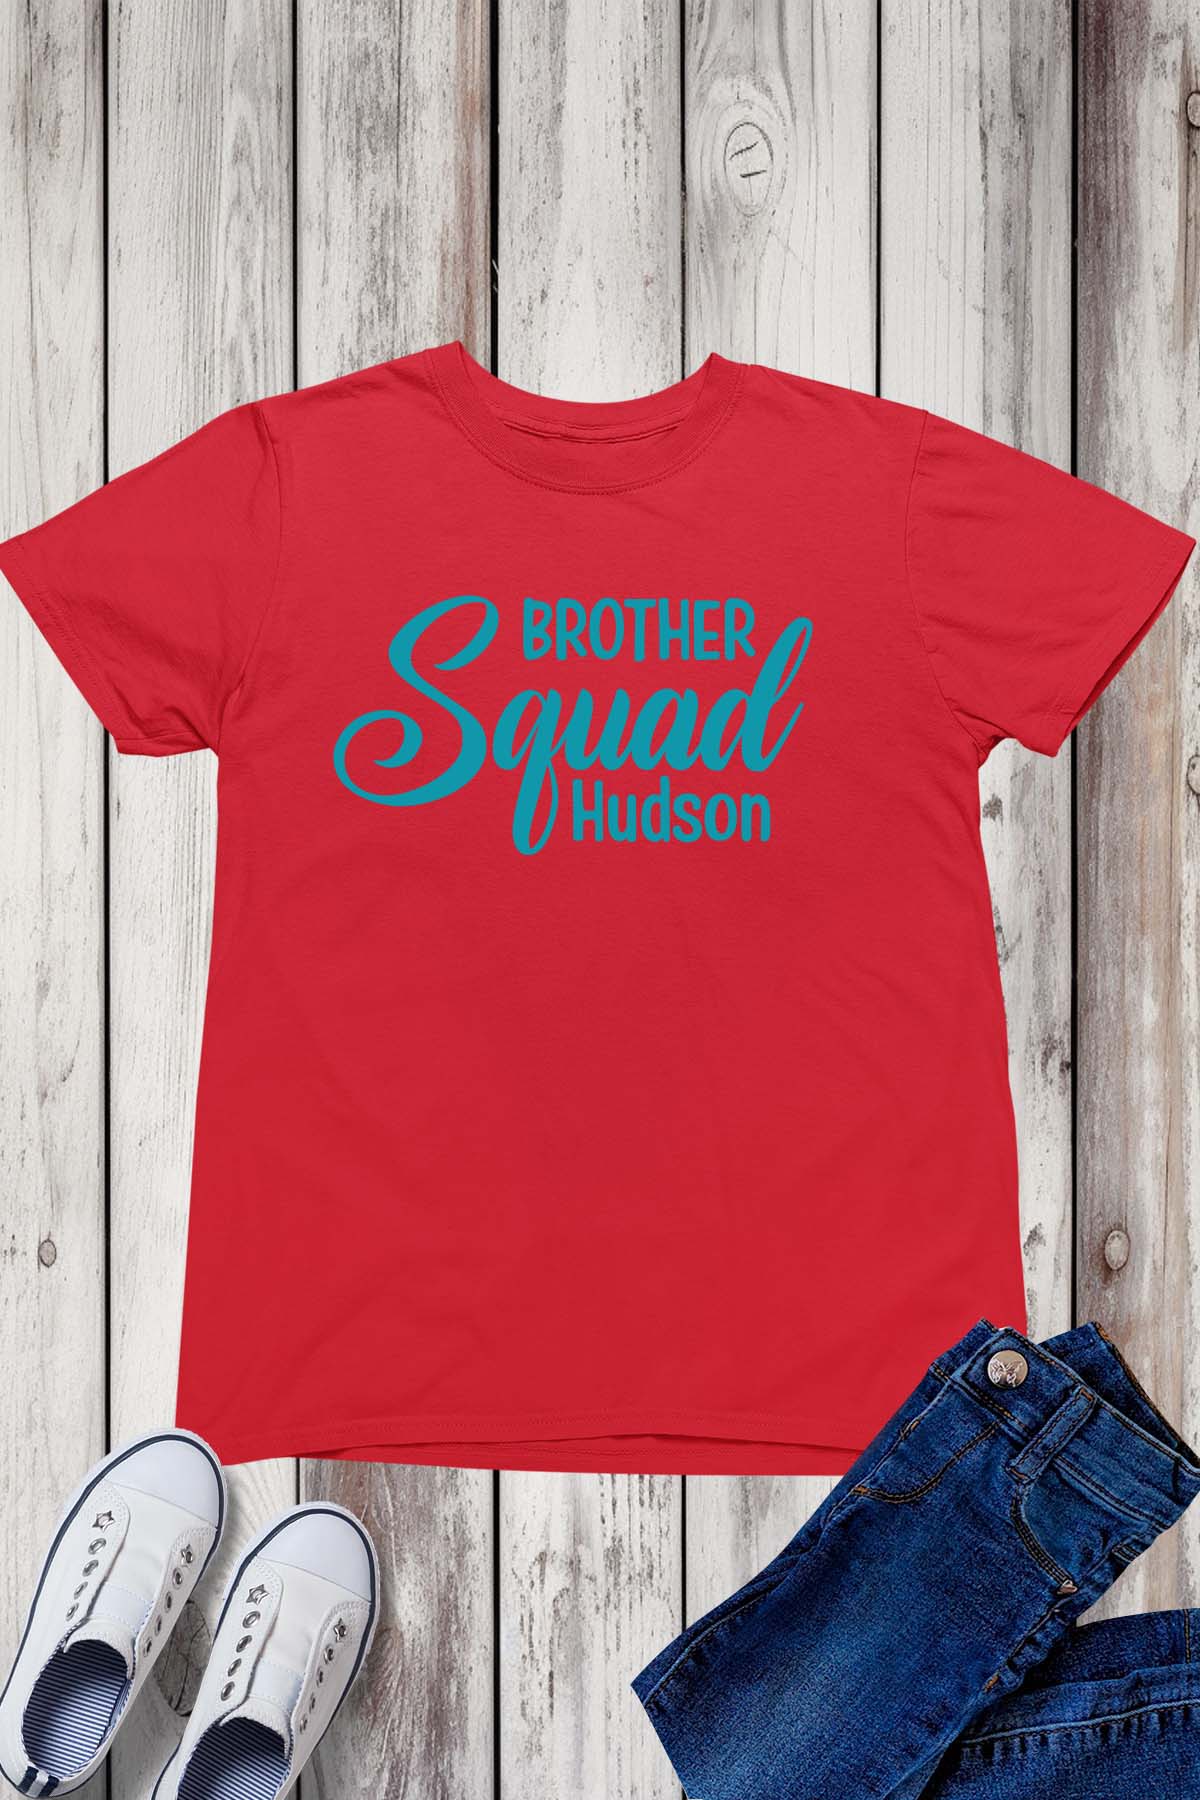 Brother Squad Custom T Shirts With name